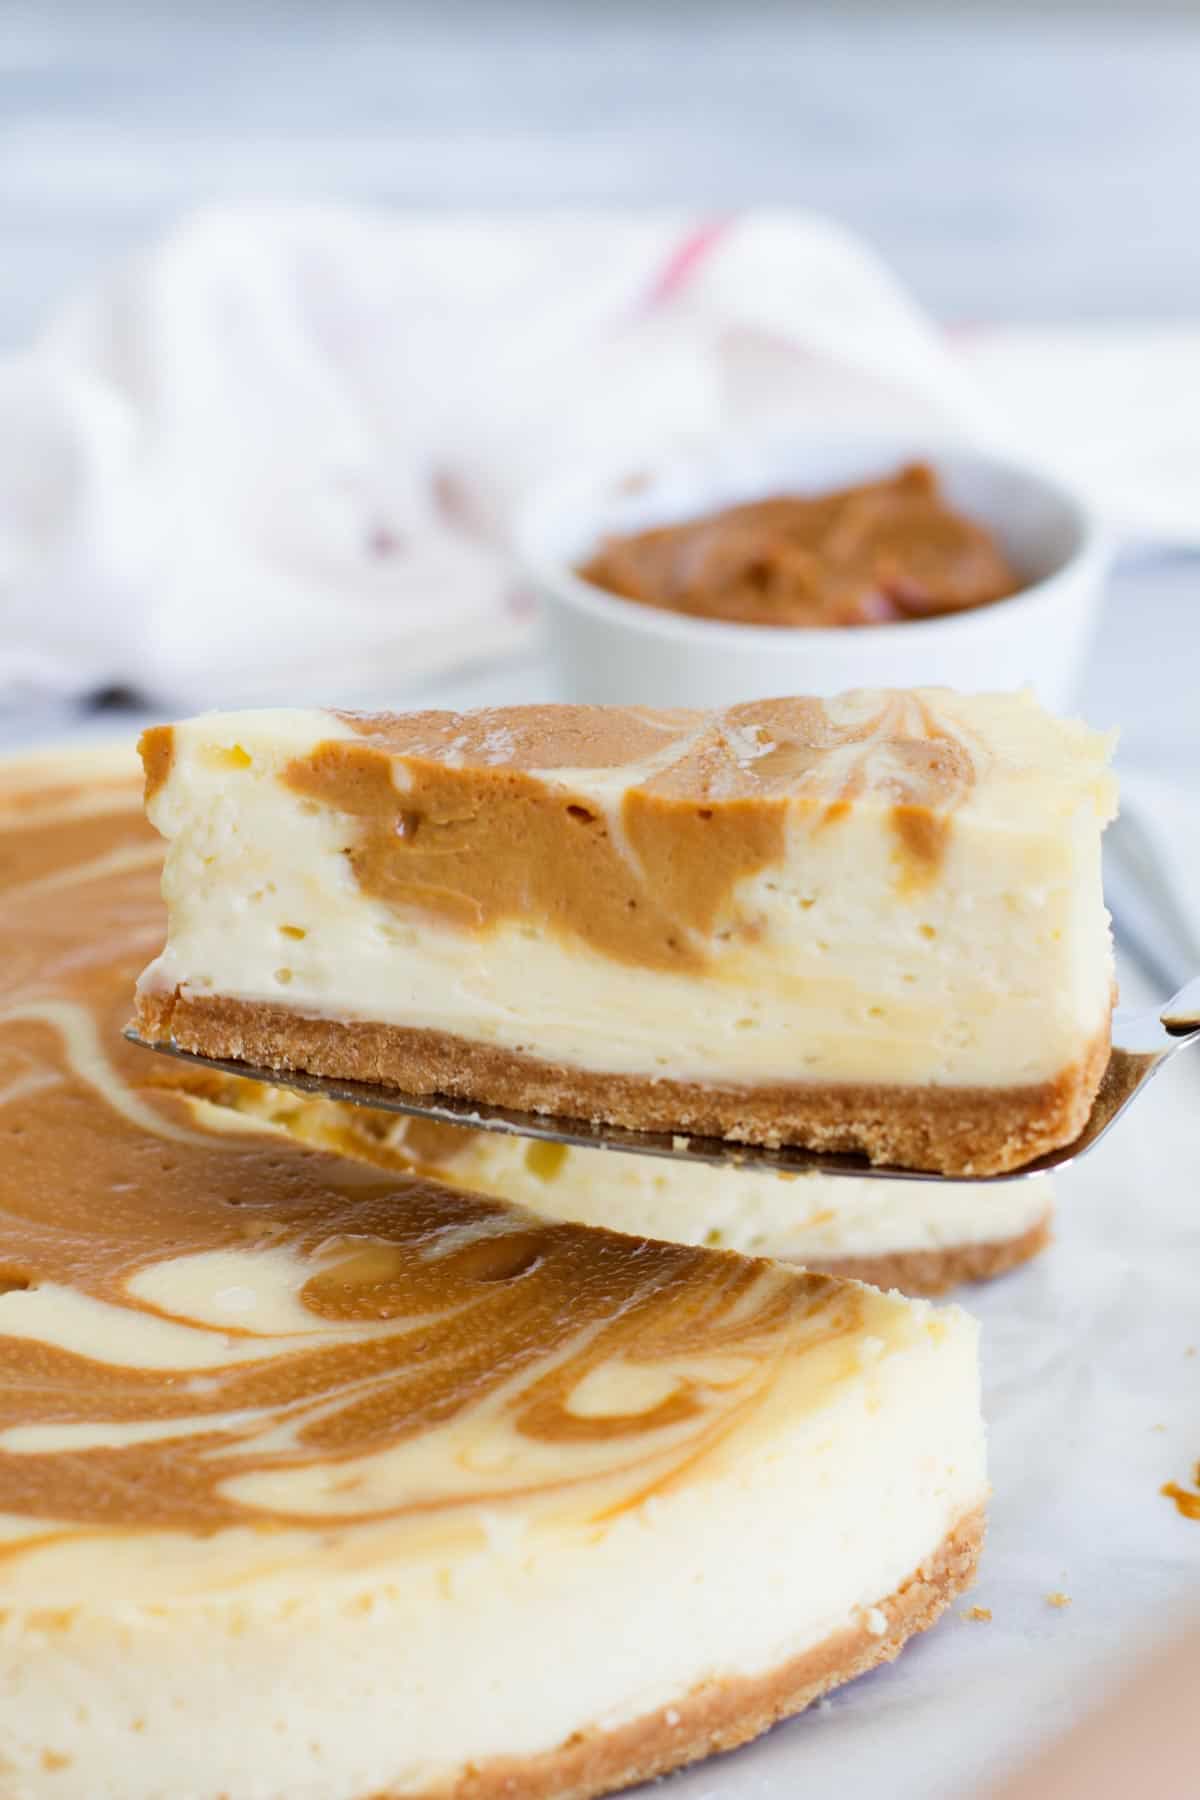 slice of dulce de leche cheesecake being taken from the full cheesecake.